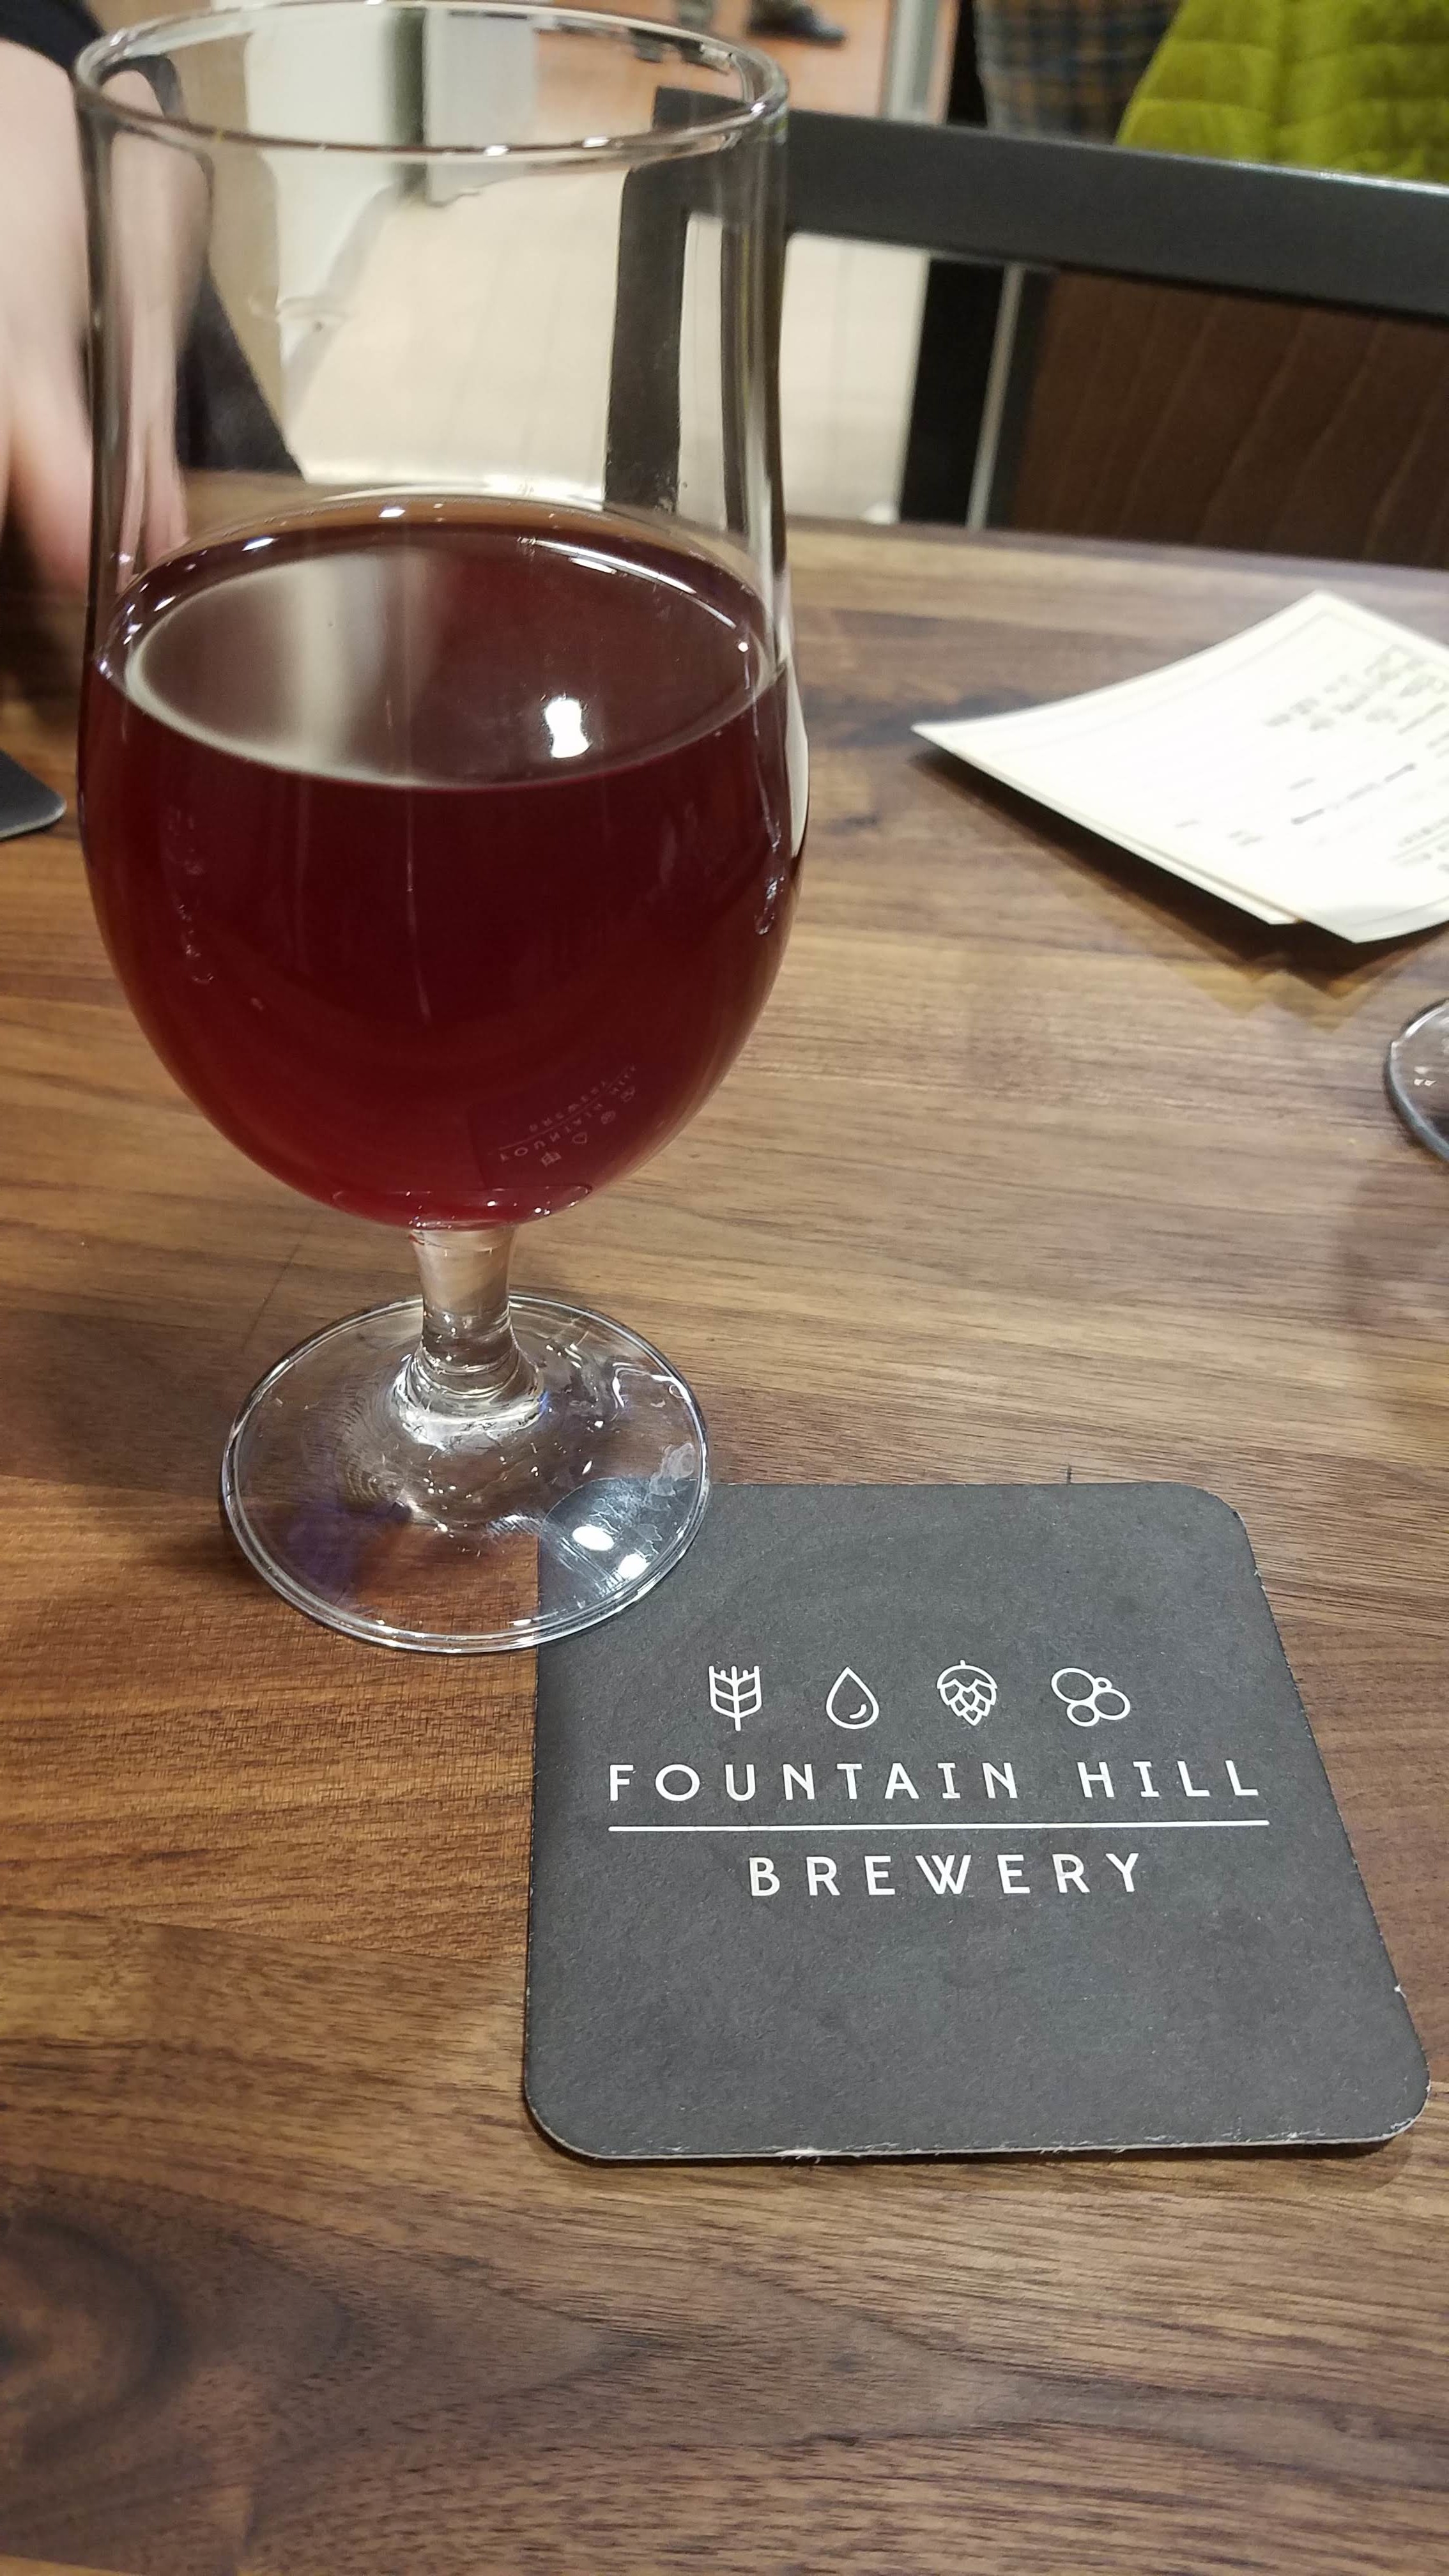 Fountain Hill Brewery